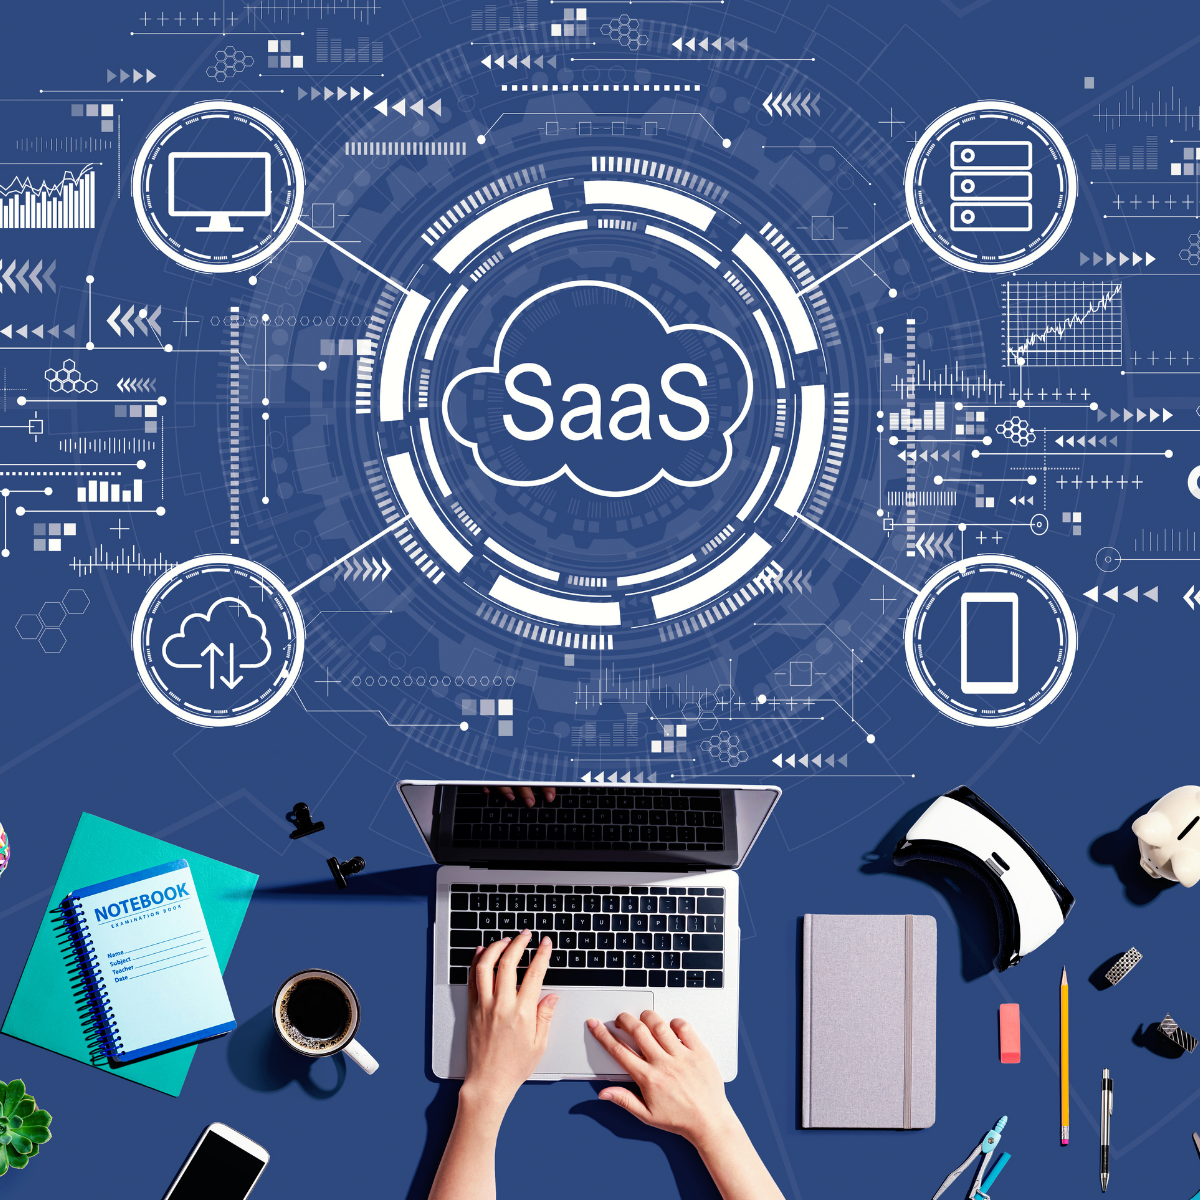 Saas image - The Shift to Software Subscription